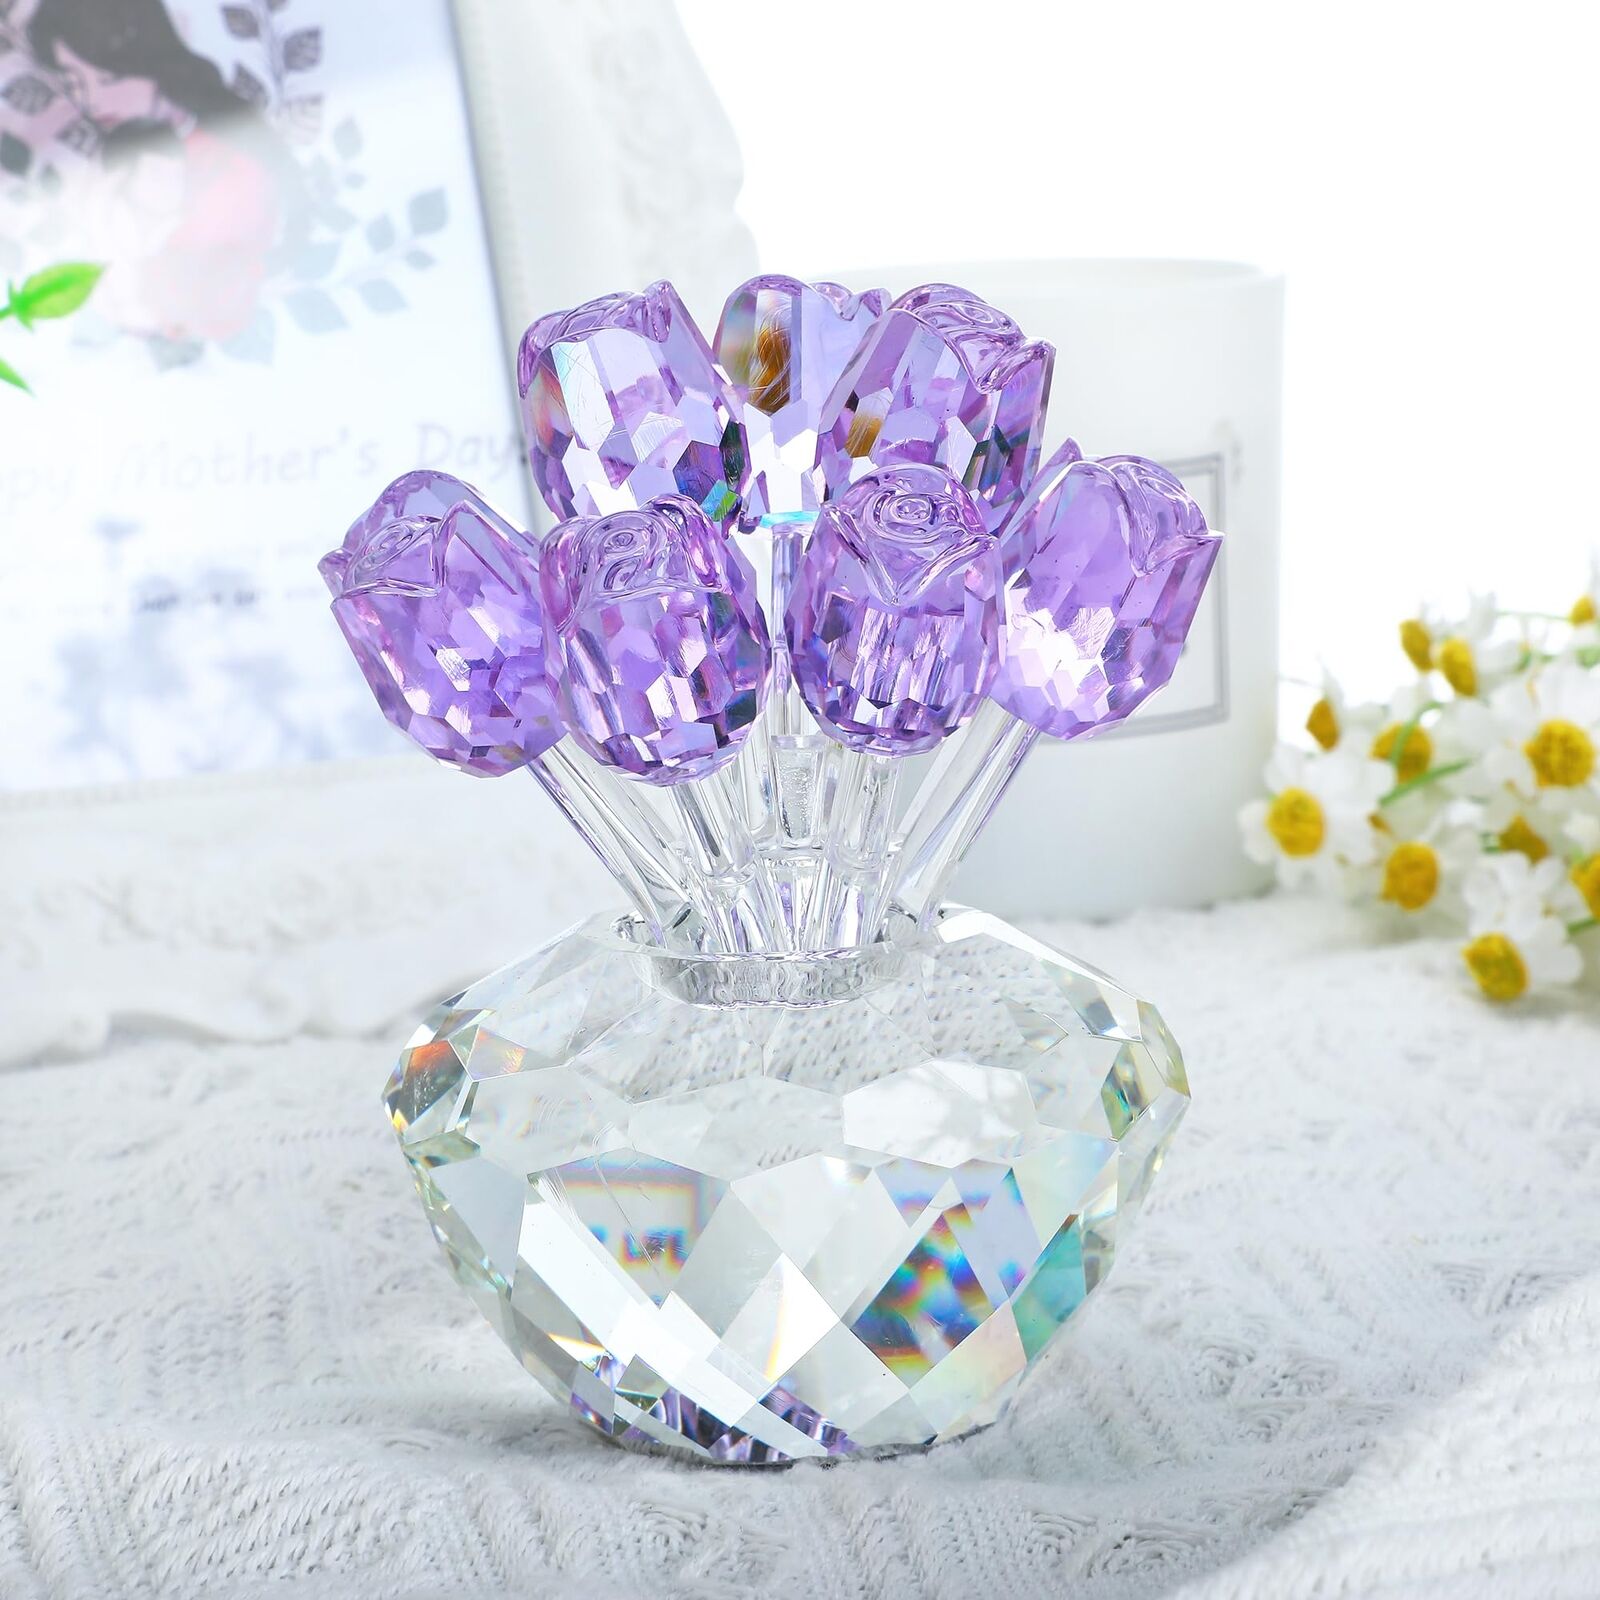 HDCRYSTALGIFTS Crystal Rose Flower Figurine Ornament Collectibles for Valenti...